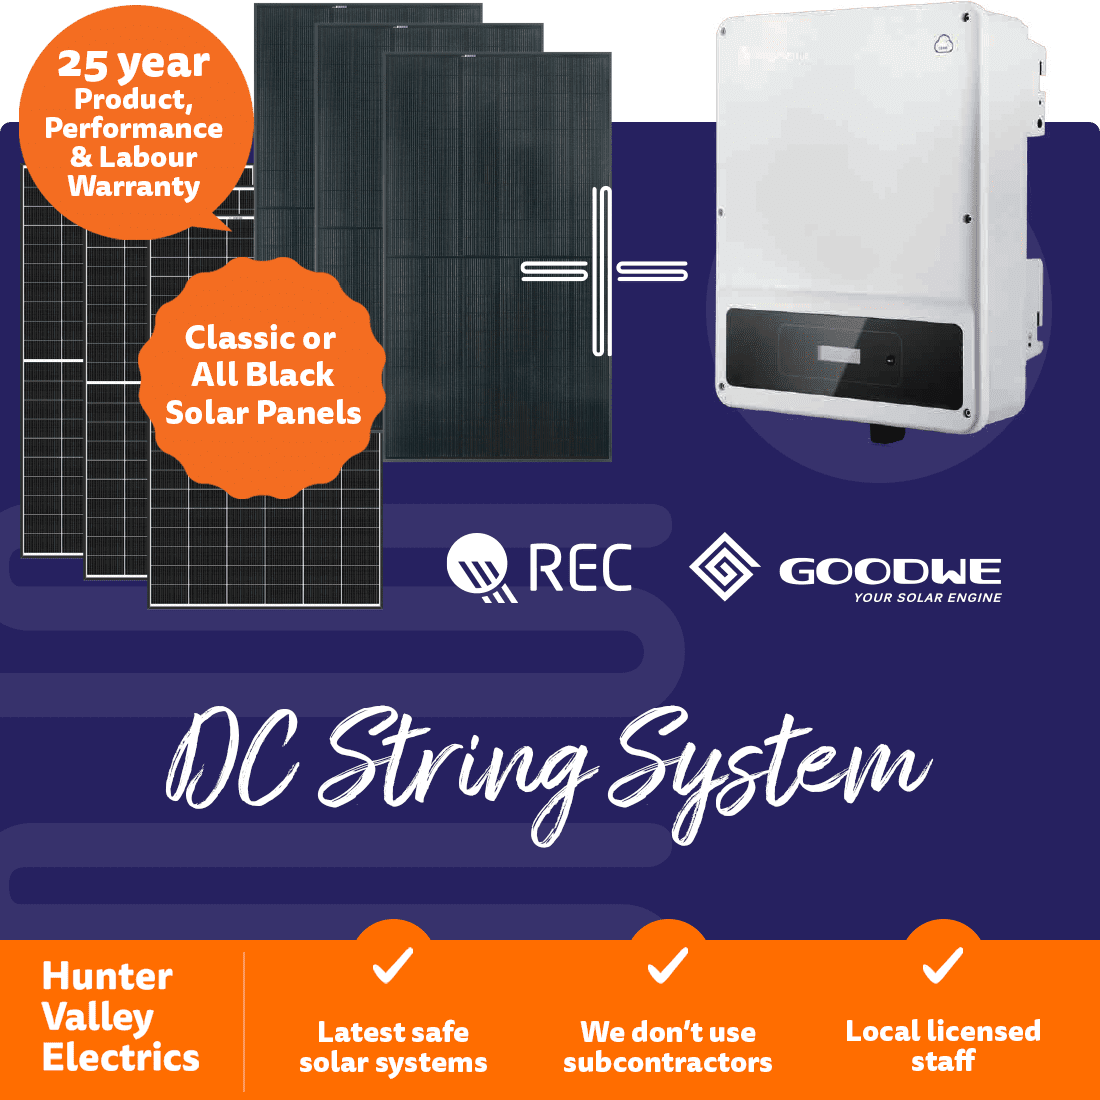 DC String System Goodwe Packages - Solar Panels